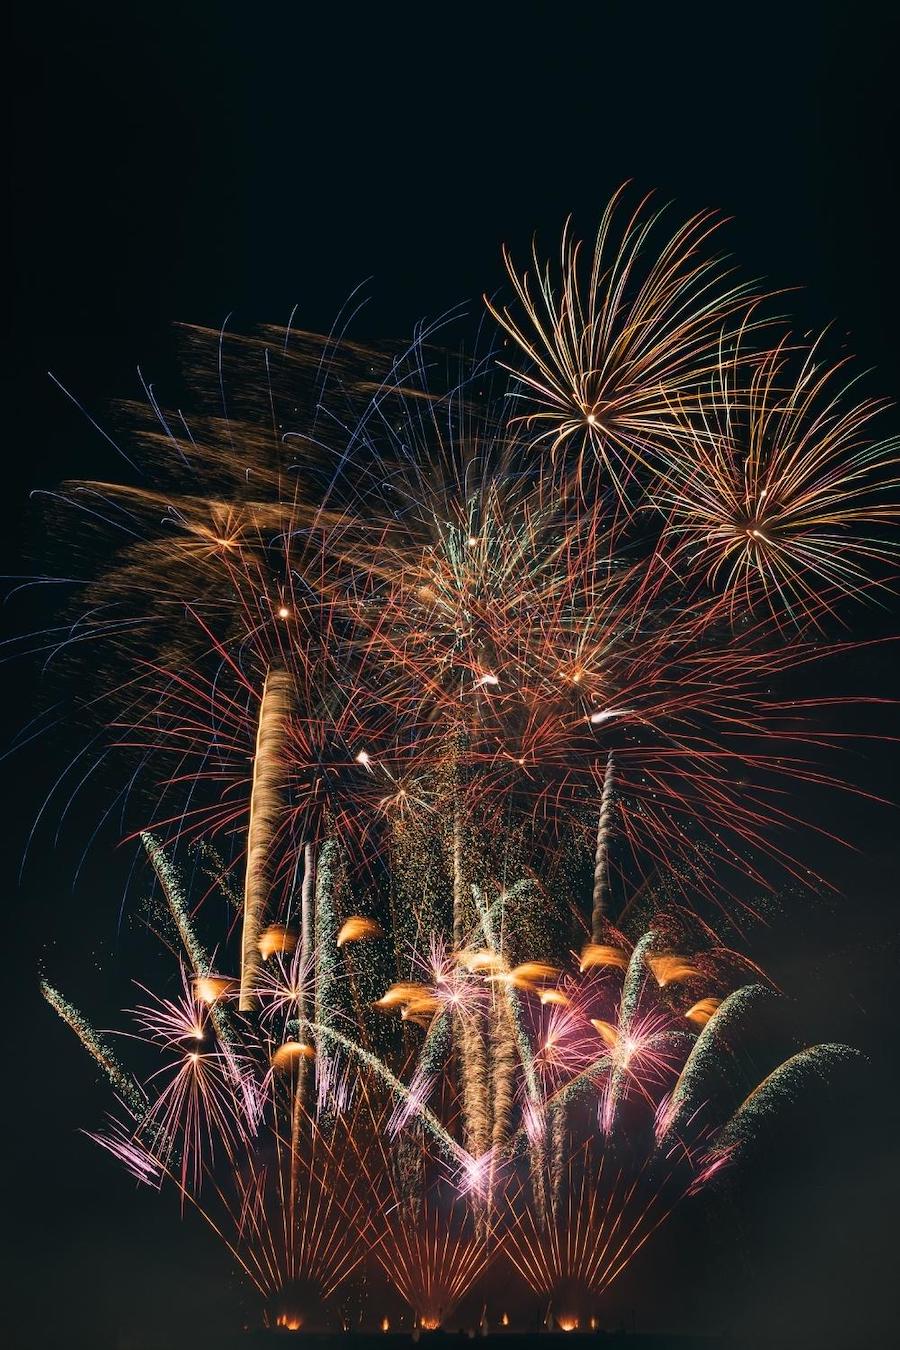 How to celebrate Guy Fawkes Night in London - What is Guy Fawkes night in London?